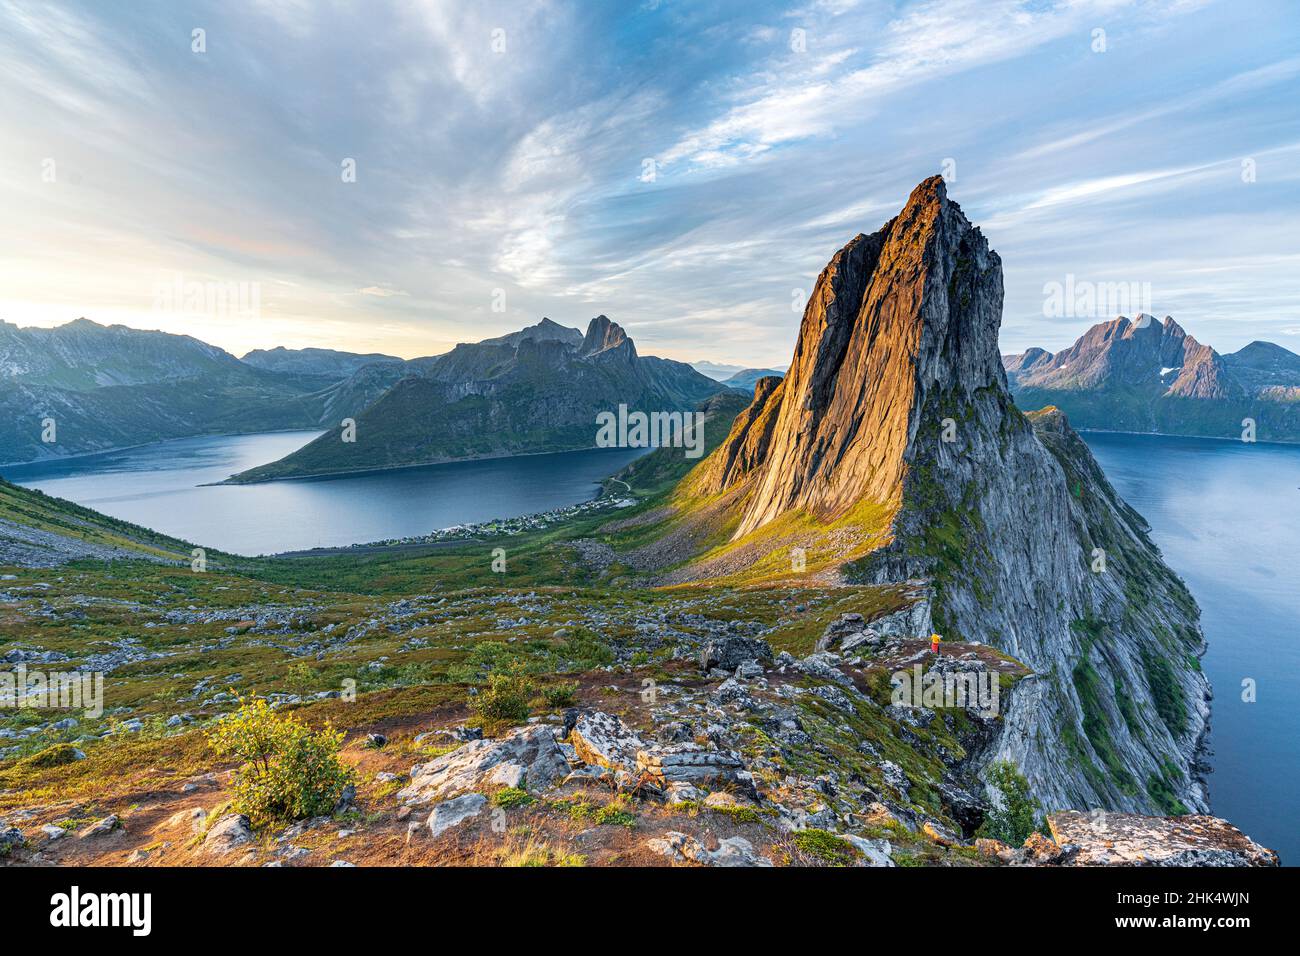 Sunrise over the clear water of the fjord and Segla mountain, Senja island, Troms county, Norway, Scandinavia, Europe Stock Photo